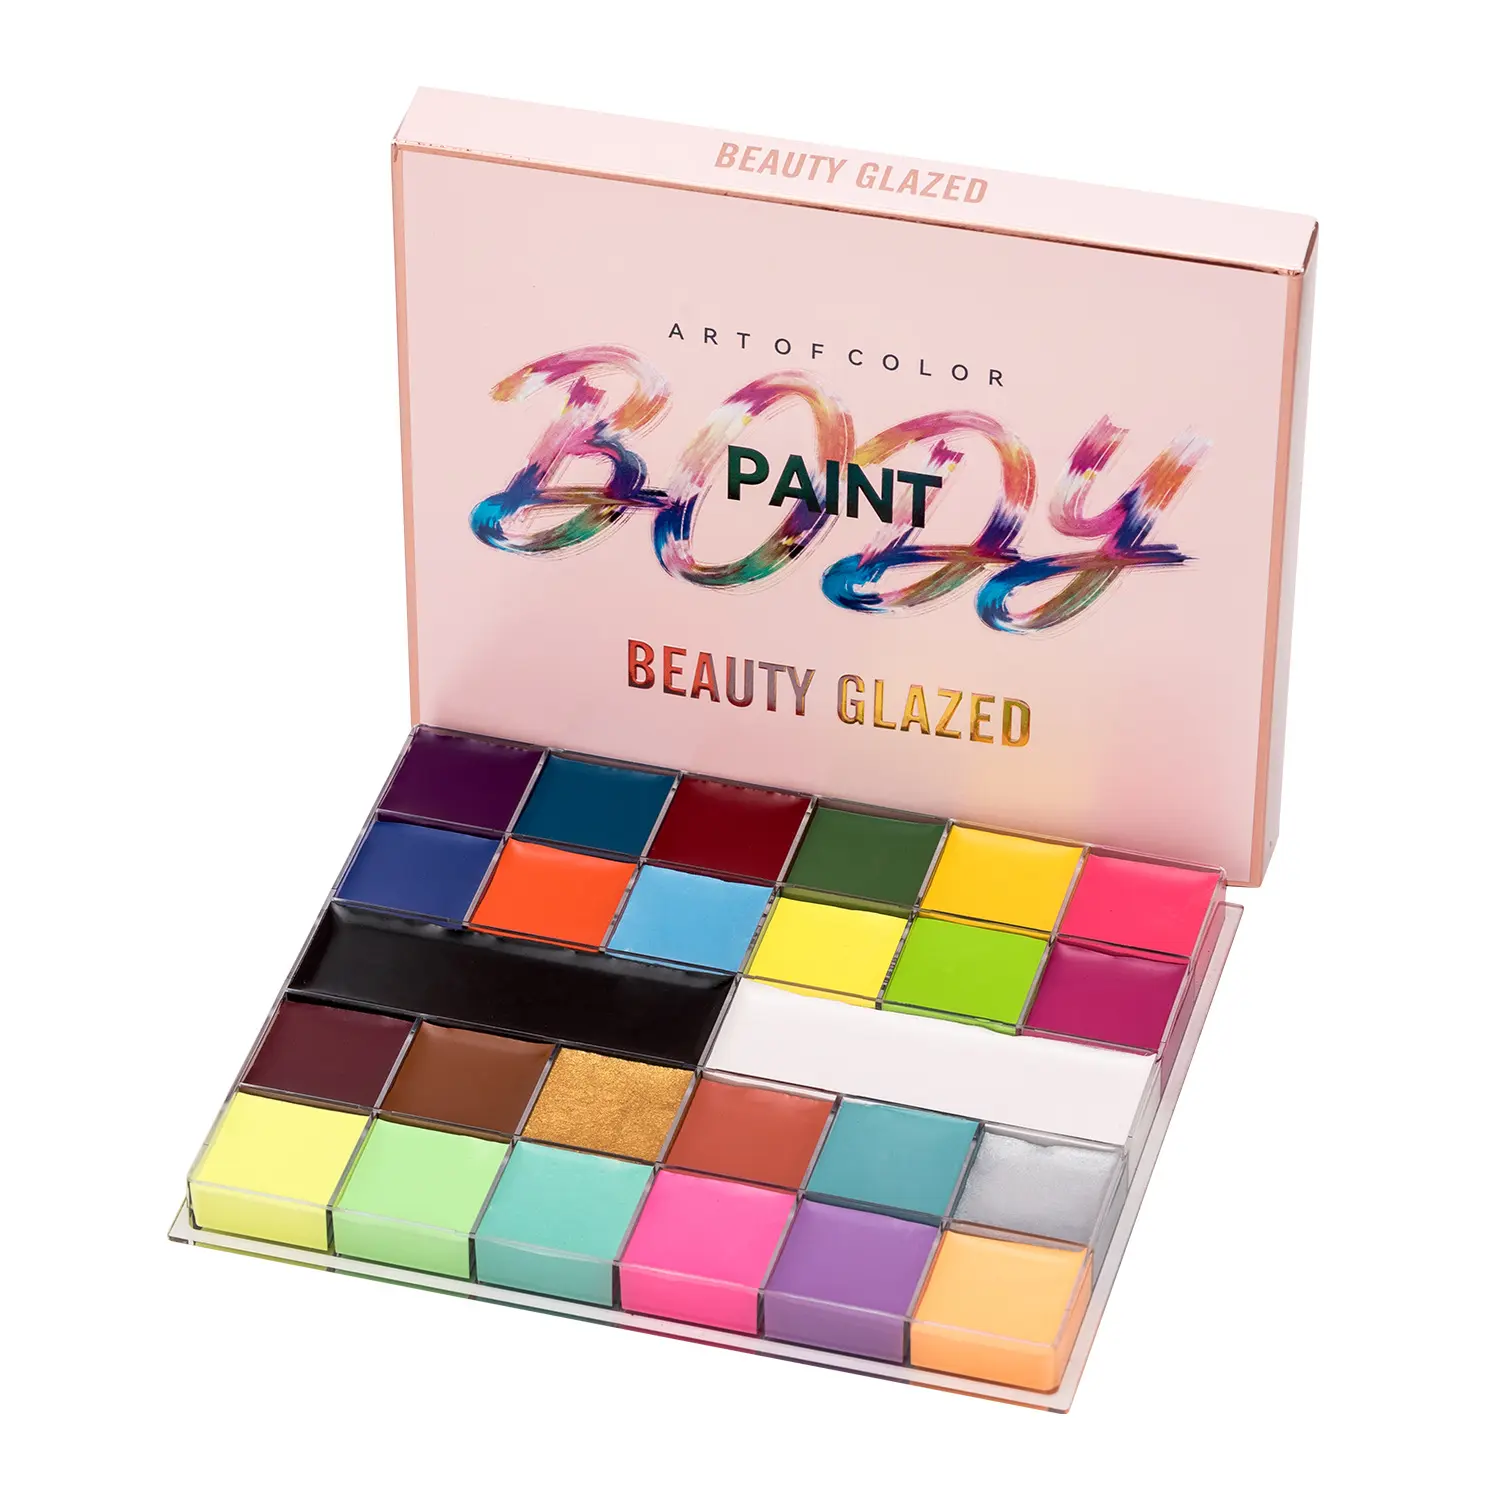 BEAUTY GLAZED 26 Colors Face Body Paint Oil Palette Flash Tattoo Painting Art For Halloween Party Makeup Safe For Kids BEAU